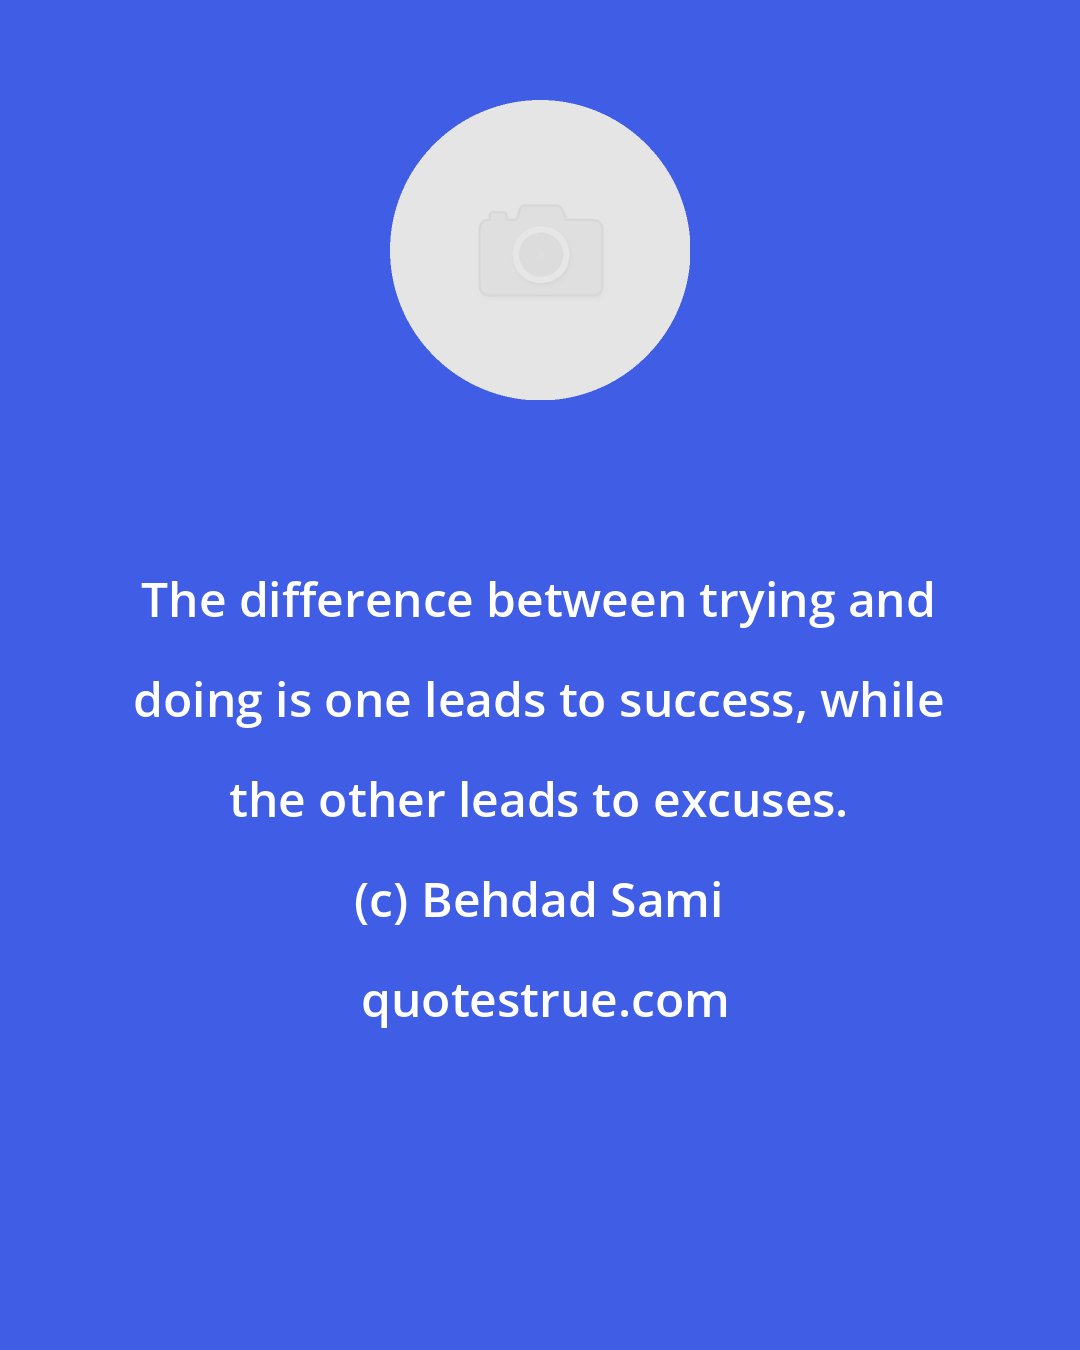 Behdad Sami: The difference between trying and doing is one leads to success, while the other leads to excuses.